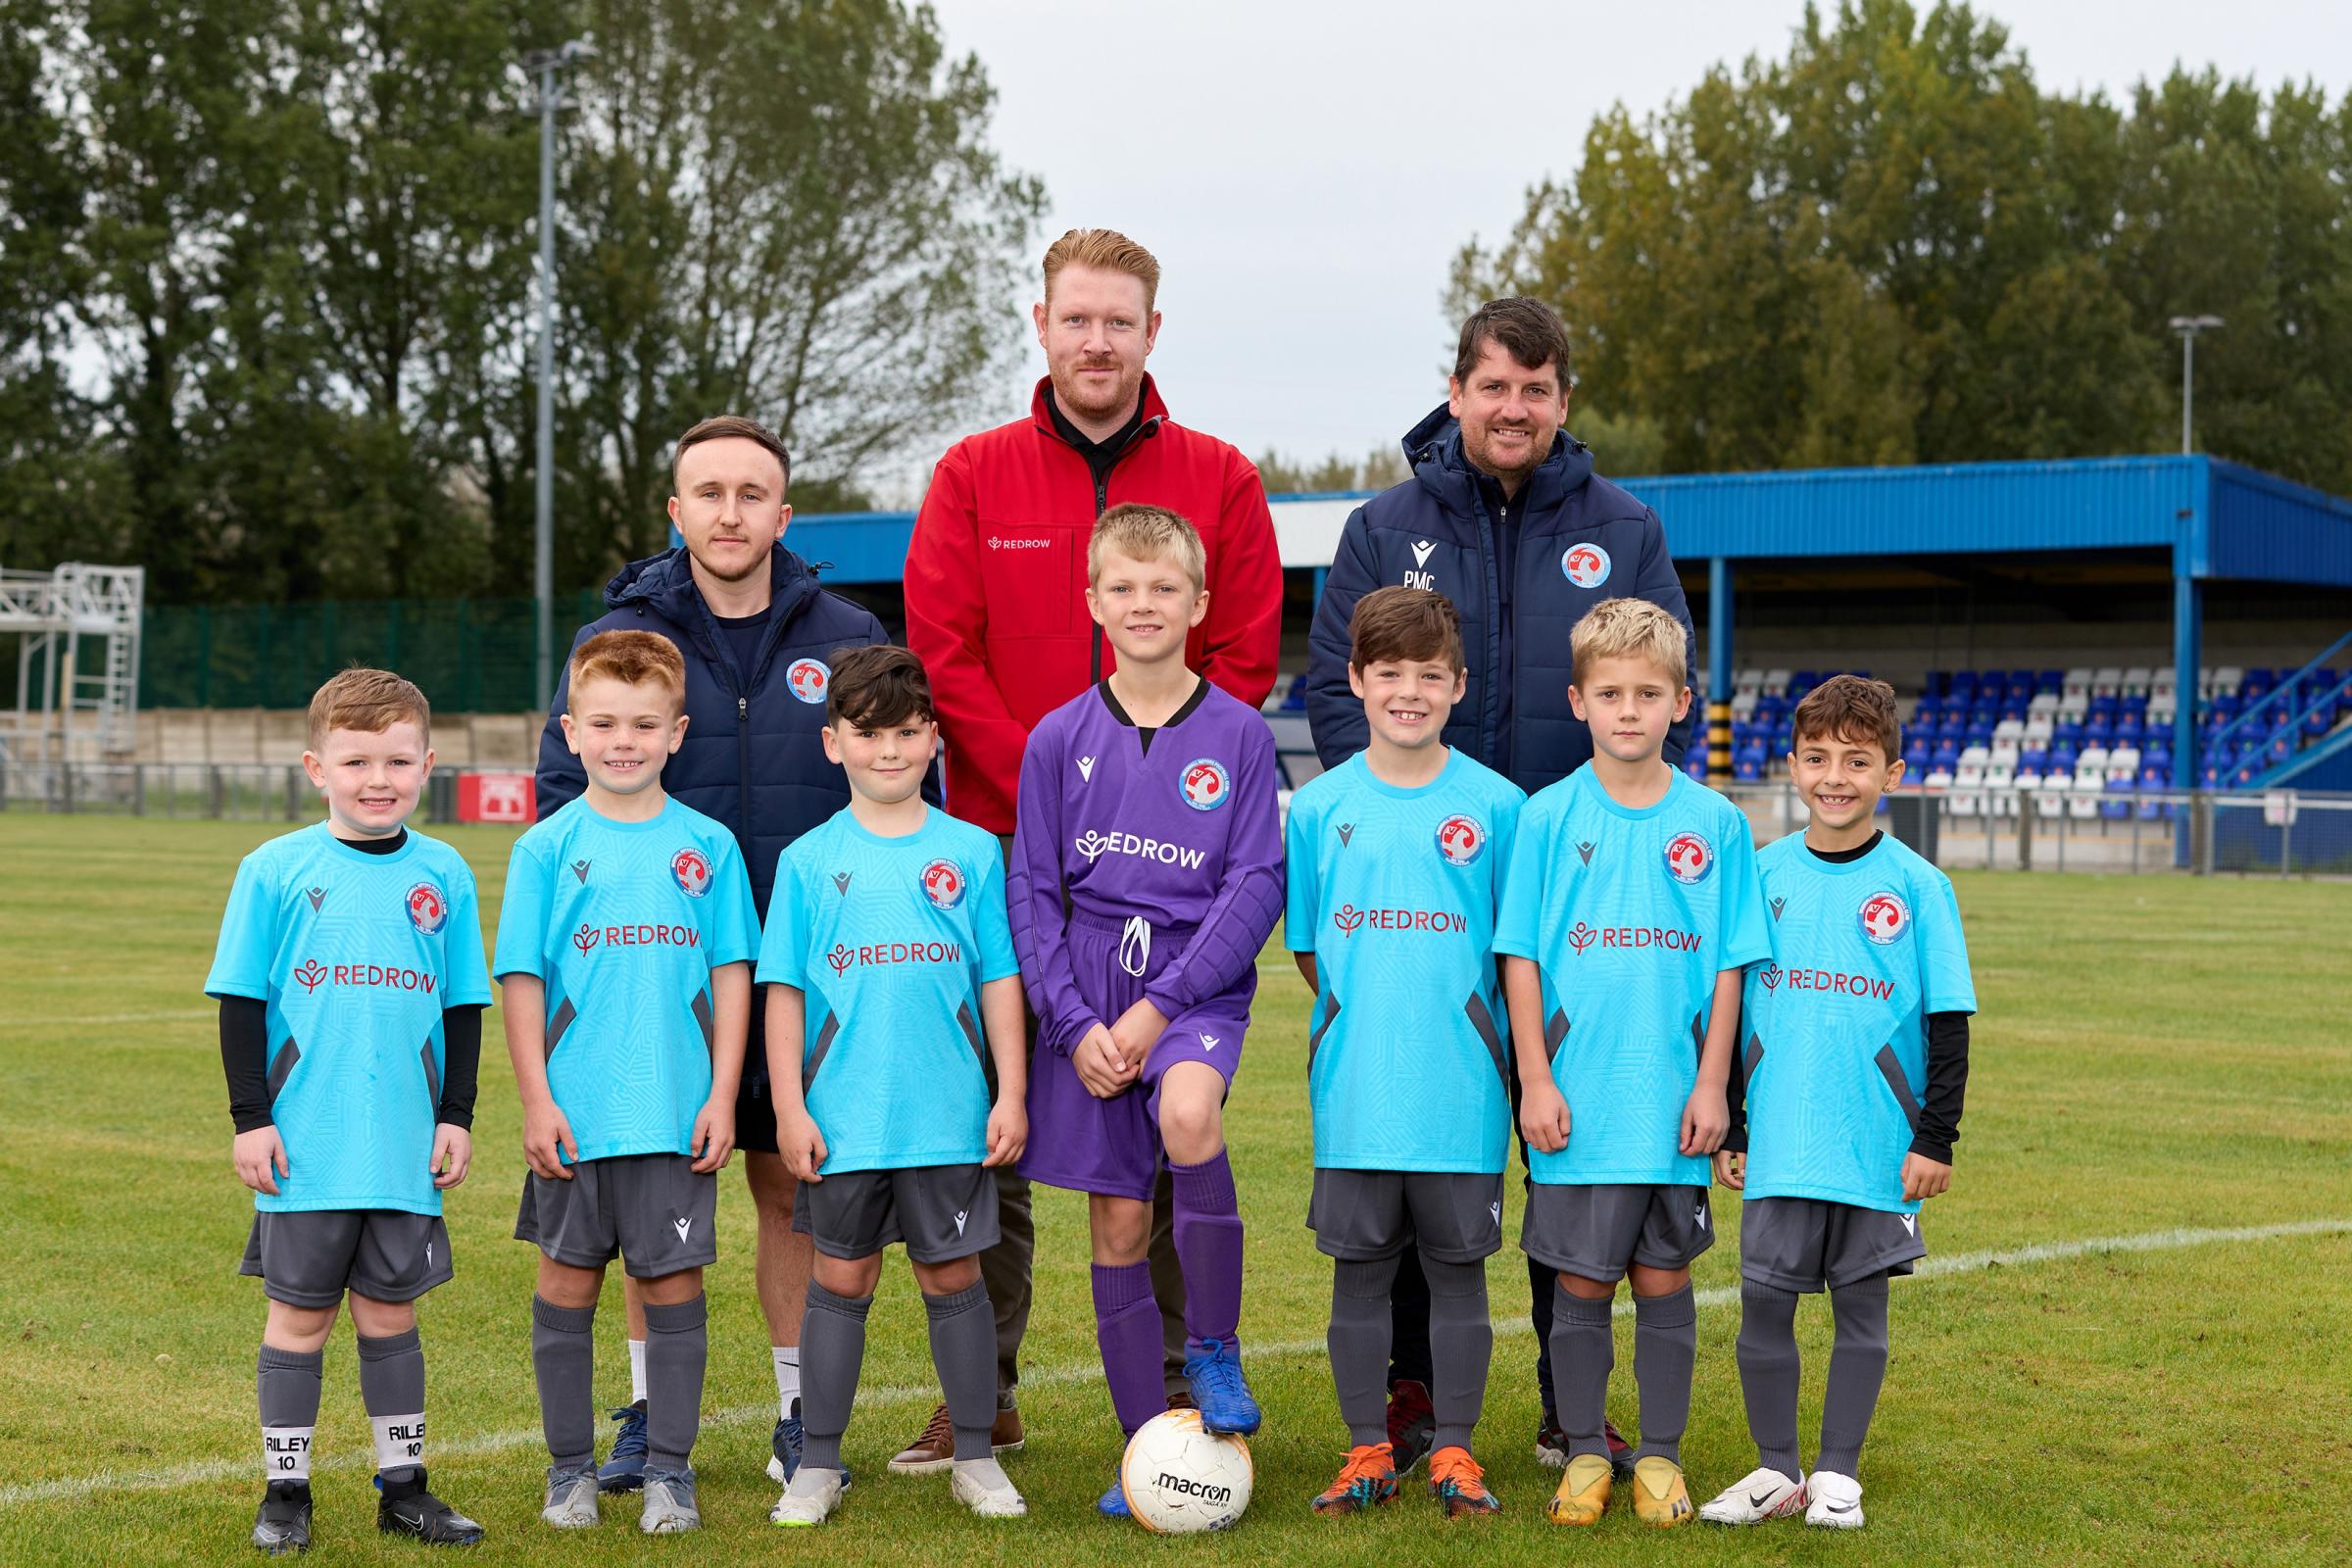 Coach Rhys Foster, Redrows Chris Edwards and coach Paul McDonnell with the Vauxhall Cavaliers Under 8s team.